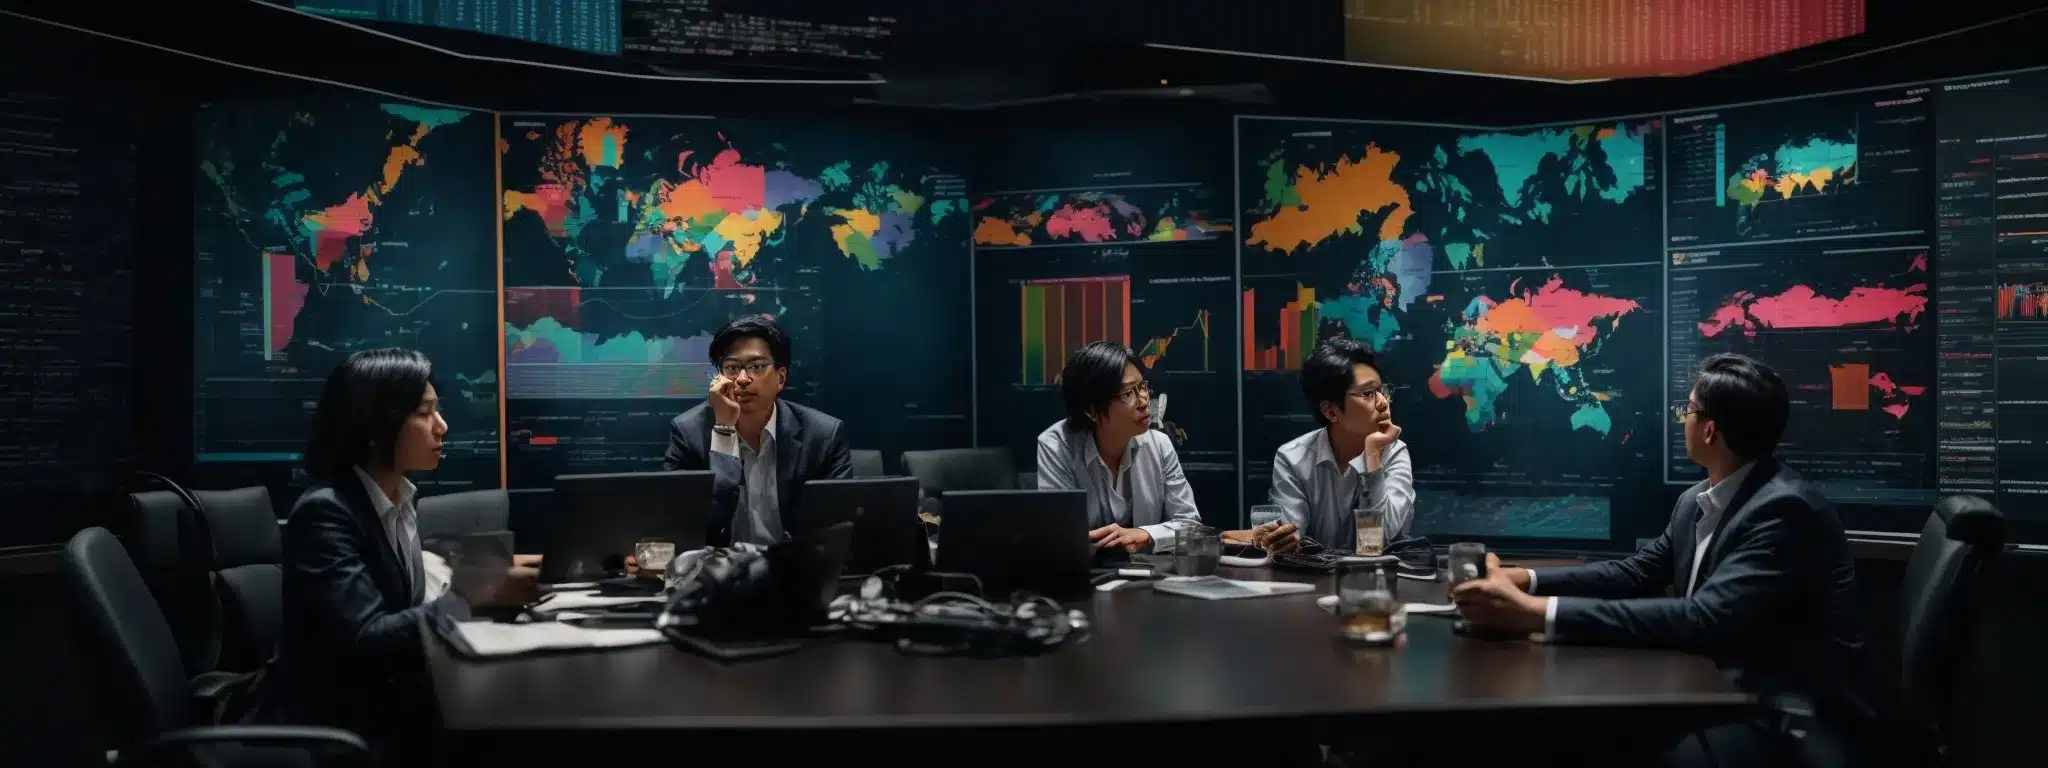 Several Analysts Gather Around A Large Screen Displaying Colorful Graphs And Pie Charts, Deeply Engrossed In A Strategic Session.